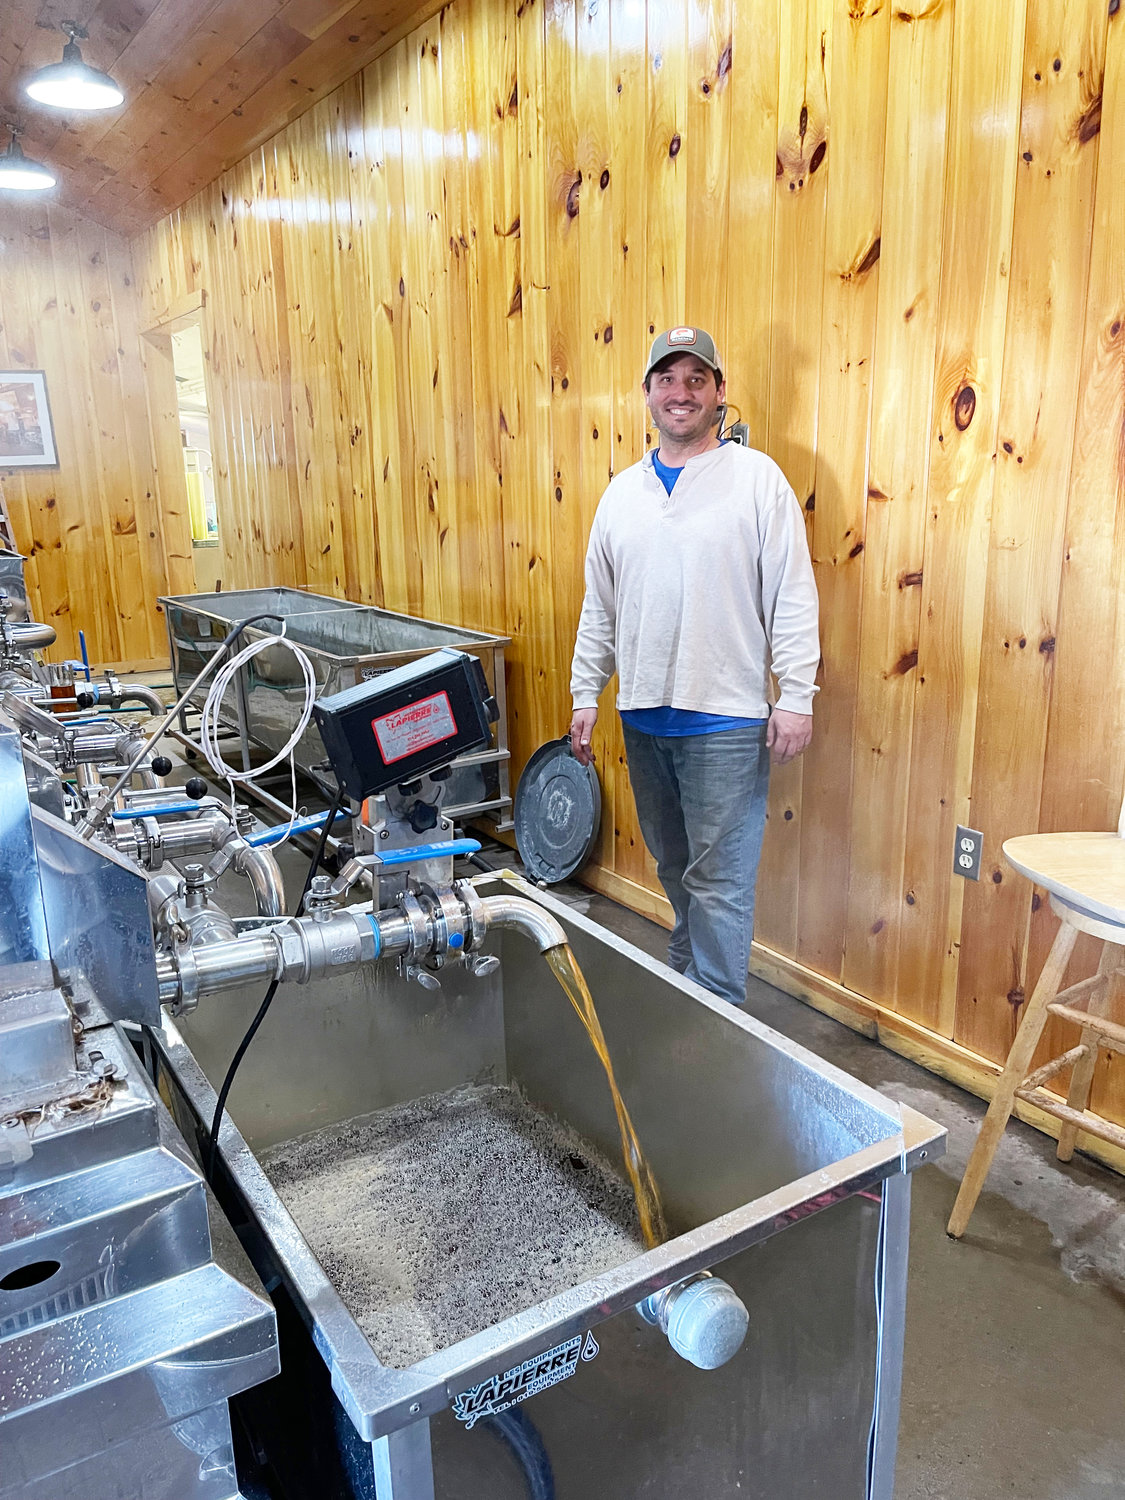 It was a busy day on Wednesday when John Garigliano and his crew made 800 gallons of maple syrup. Above, the amber syrup flows out of the Lapierre evaporater and will then be put into stainless steel barrels